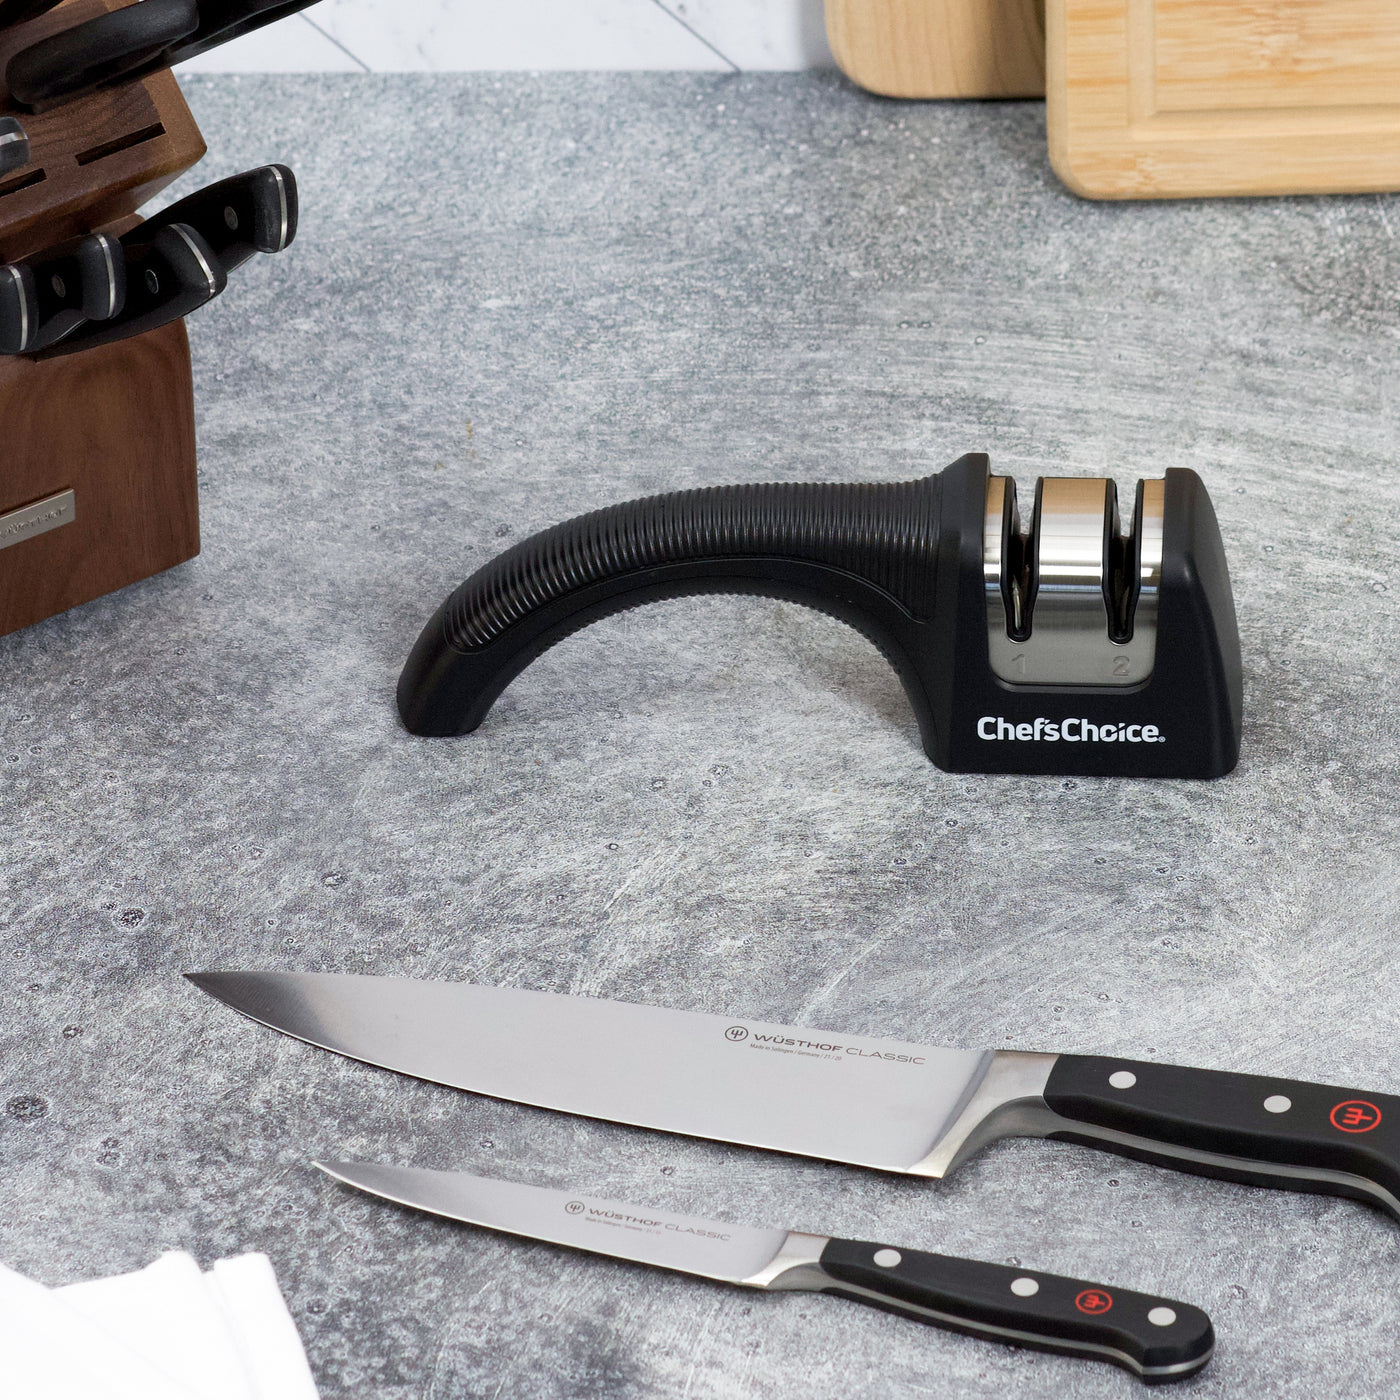 The Chef'sChoice Pronto Commercial Model 465 2-Stage Diamond Hone Manual Knife  Sharpener is specifically designed for food service professionals who want  a rugged, easy-to-use and extremely fast manual sharpener for both straight